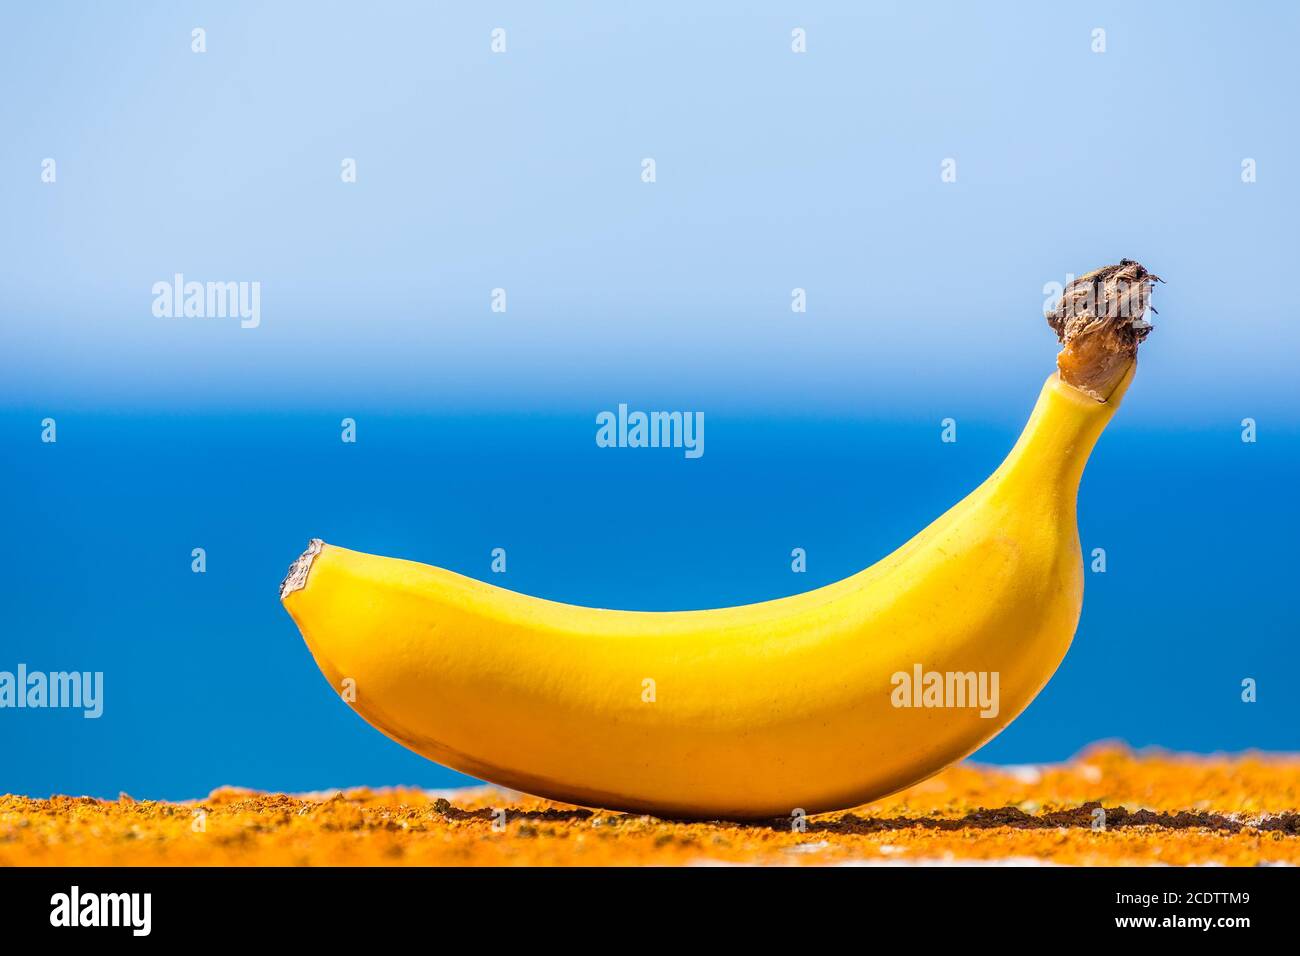 One yellow banana with blue sea and sky Stock Photo